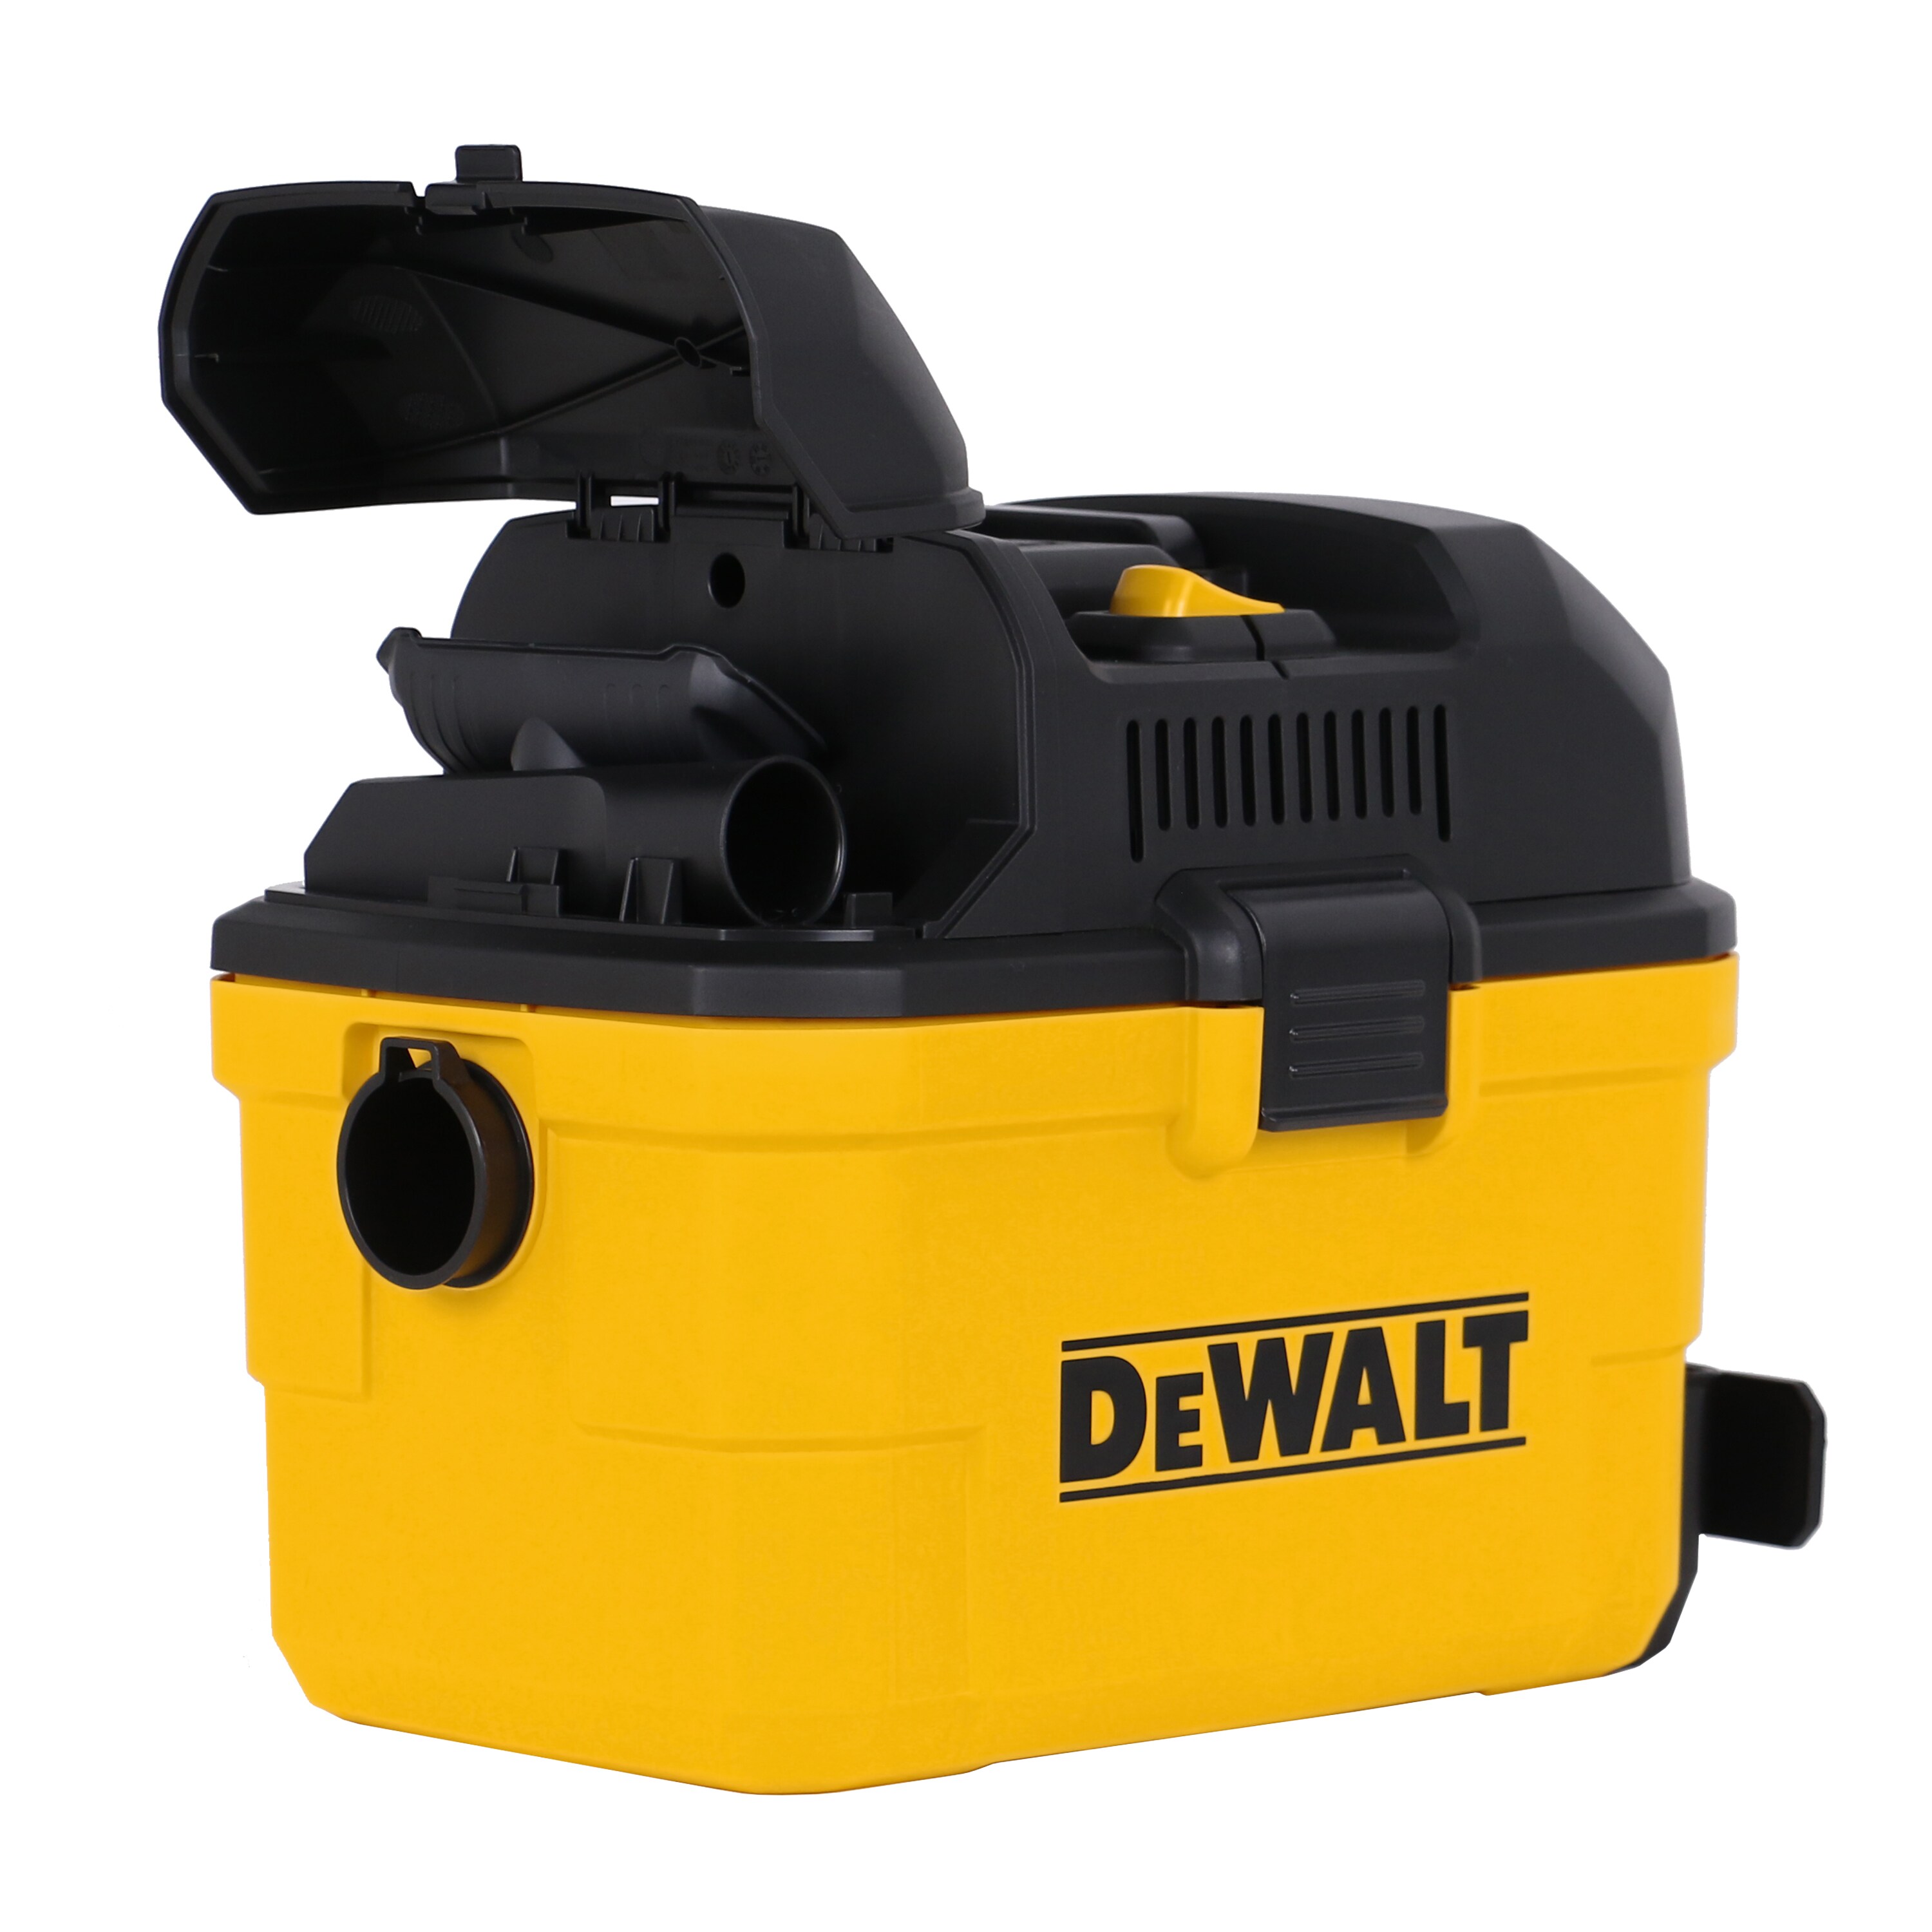 DEWALT 6-Gallons 5-HP Corded Wet/Dry Shop Vacuum with Accessories